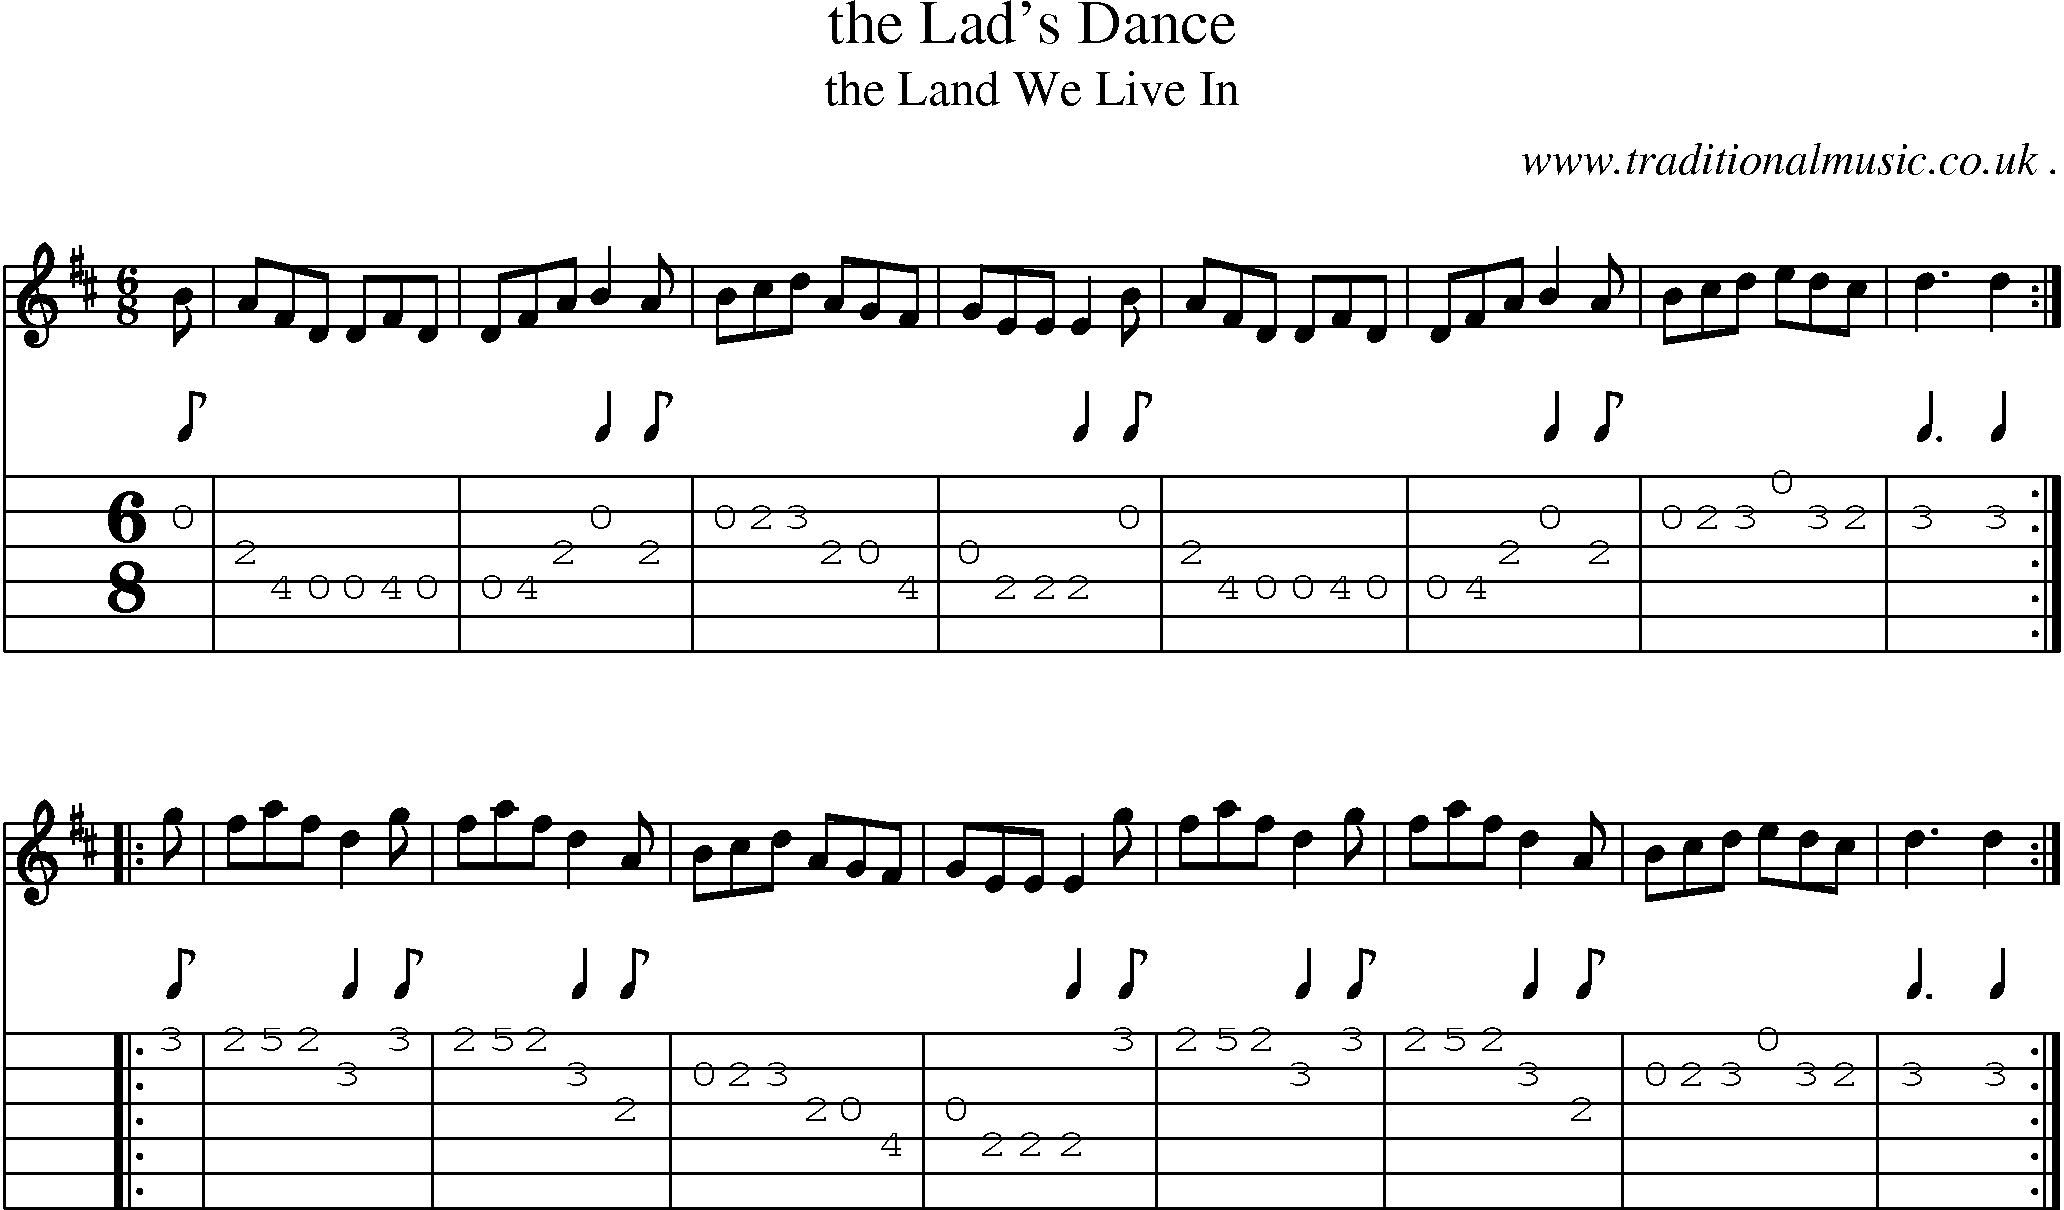 Sheet-music  score, Chords and Guitar Tabs for The Lads Dance